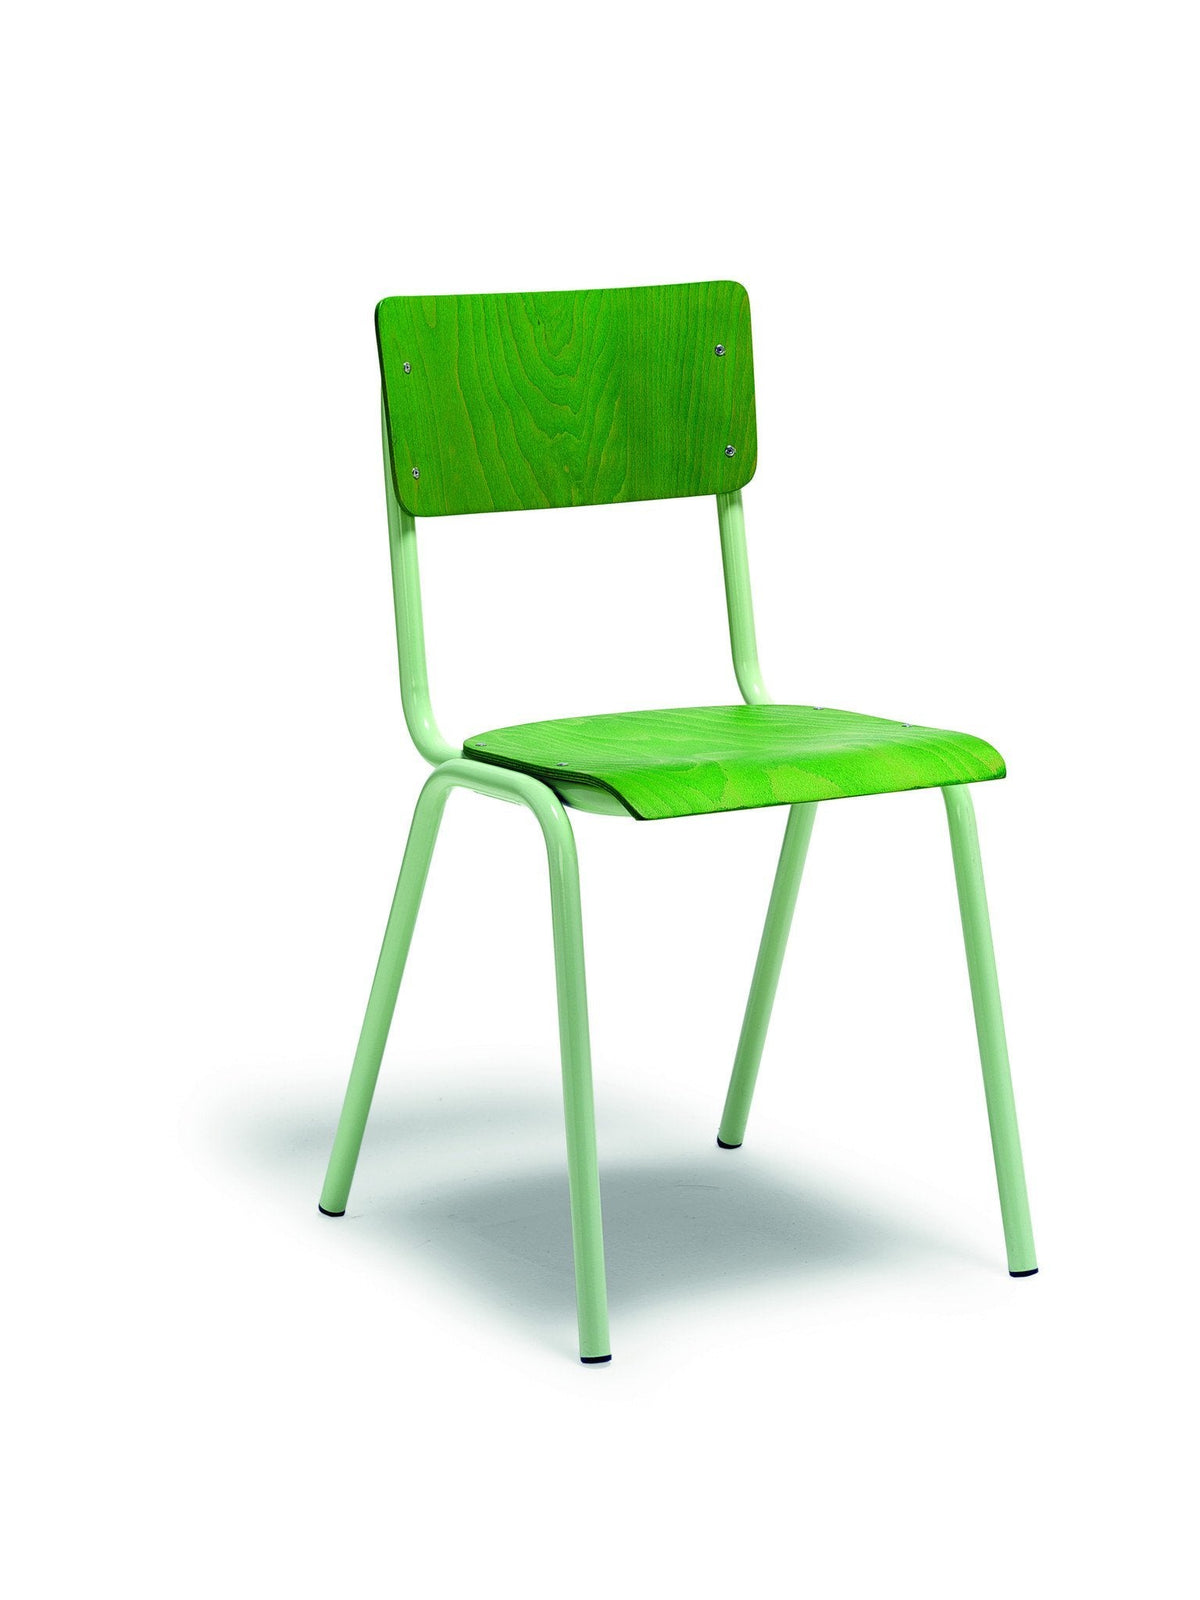 Susy Side Chair c/w Metal Legs-Cignini-Contract Furniture Store